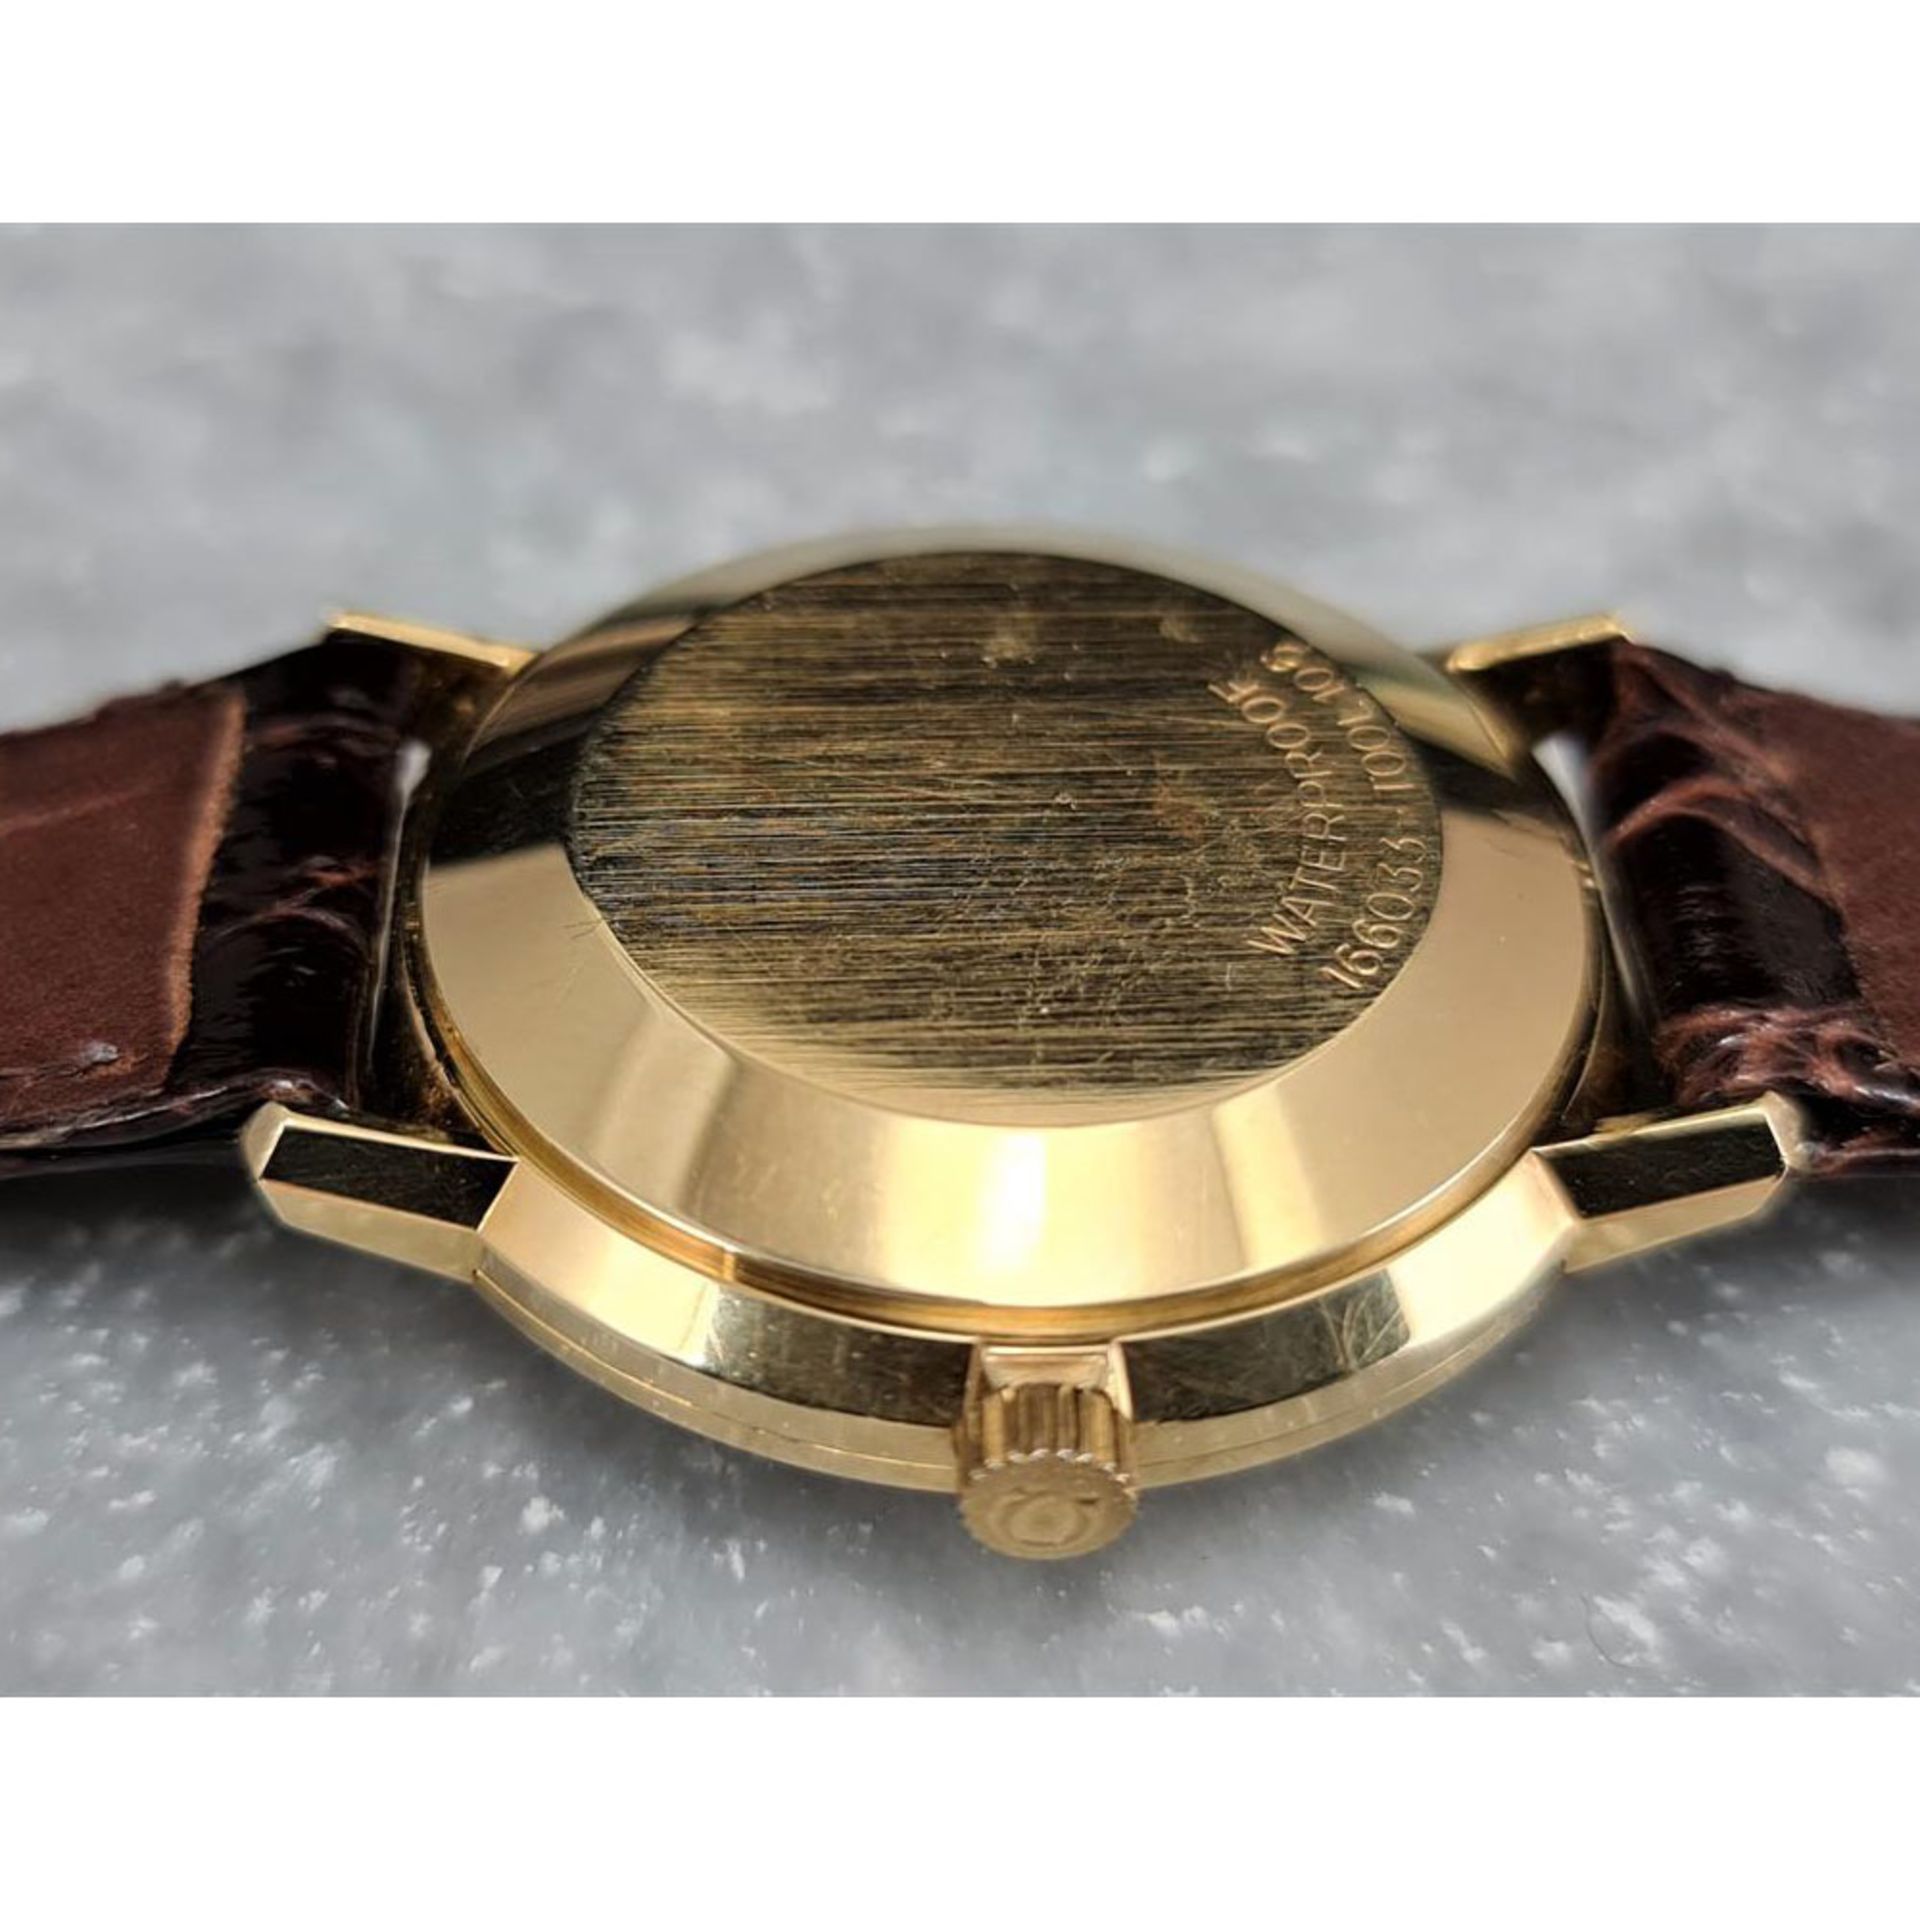 1970 Omega Seamaster De Ville Automatic Date - 14K Gold Watch - Image 8 of 8